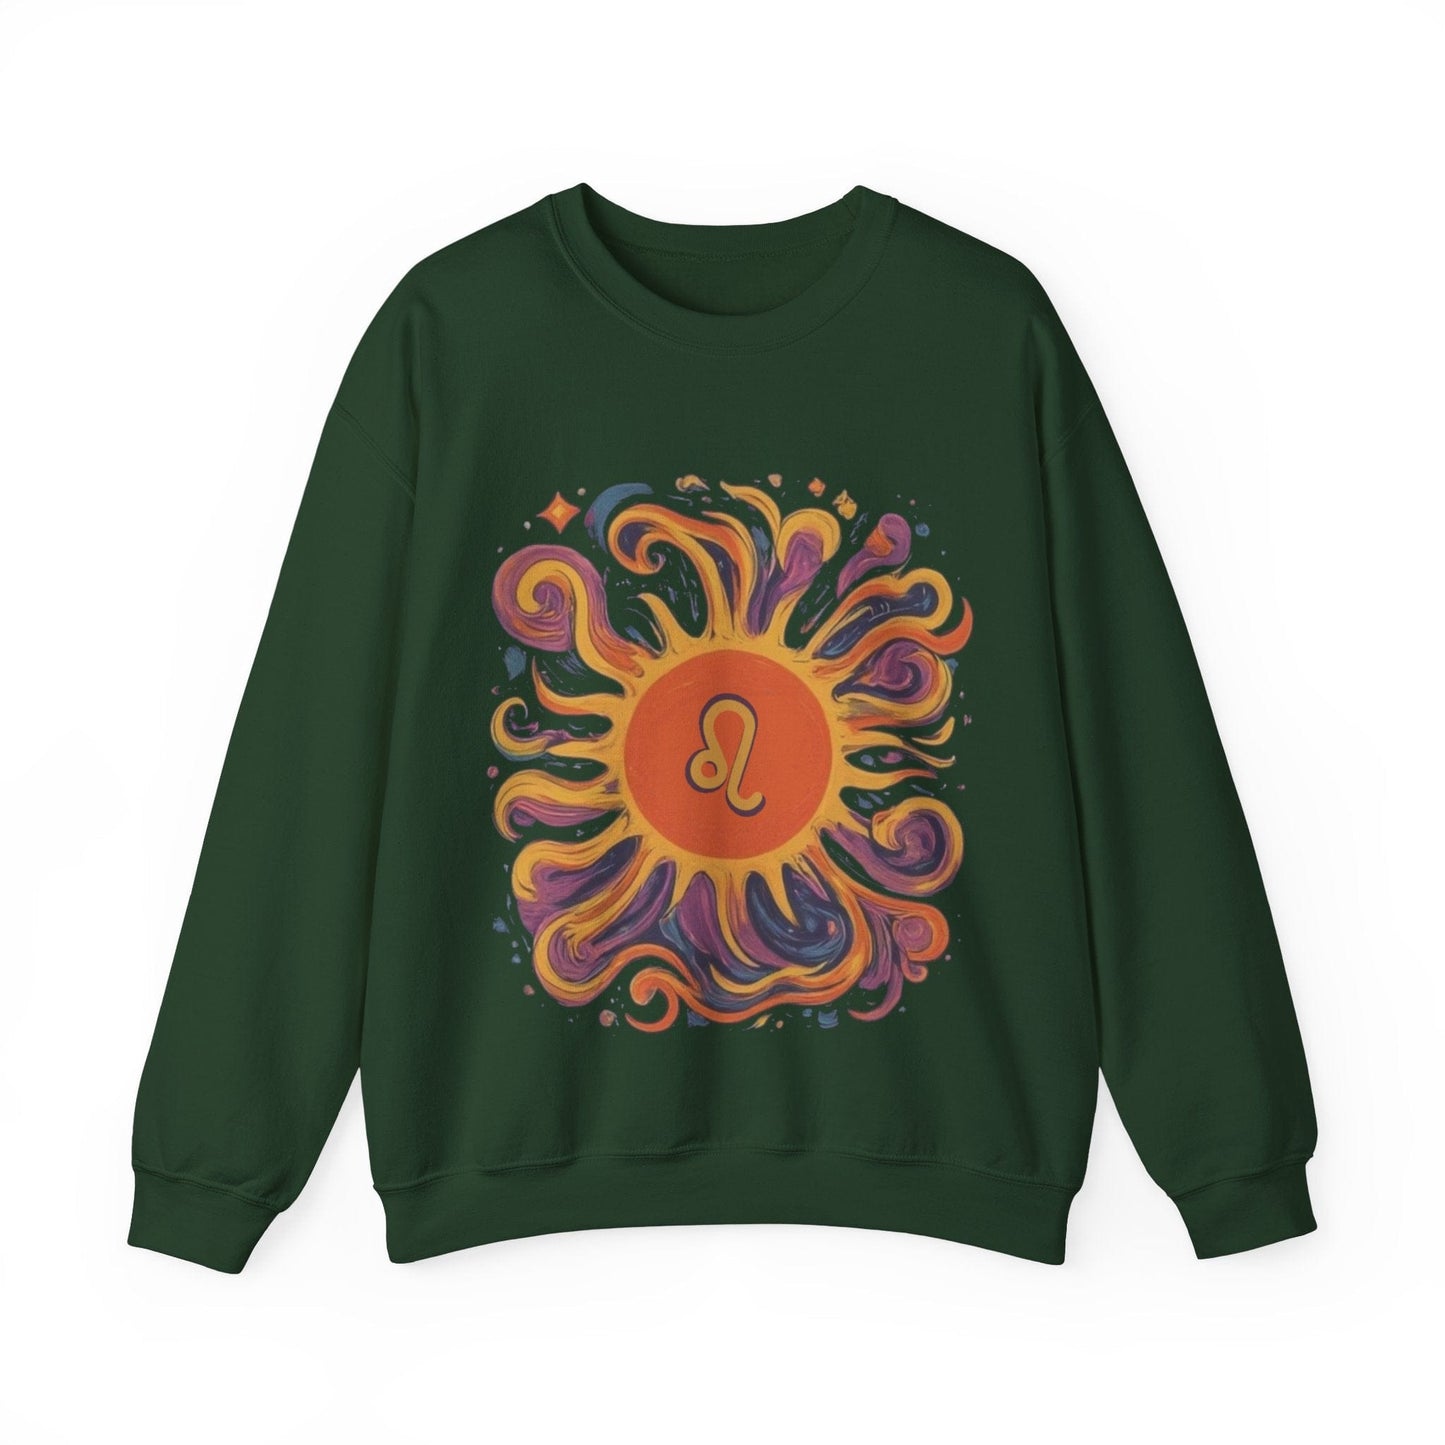 Sweatshirt S / Forest Green Leo Majestic Sun Soft Sweater: Royal Warmth for the Lion's Heart